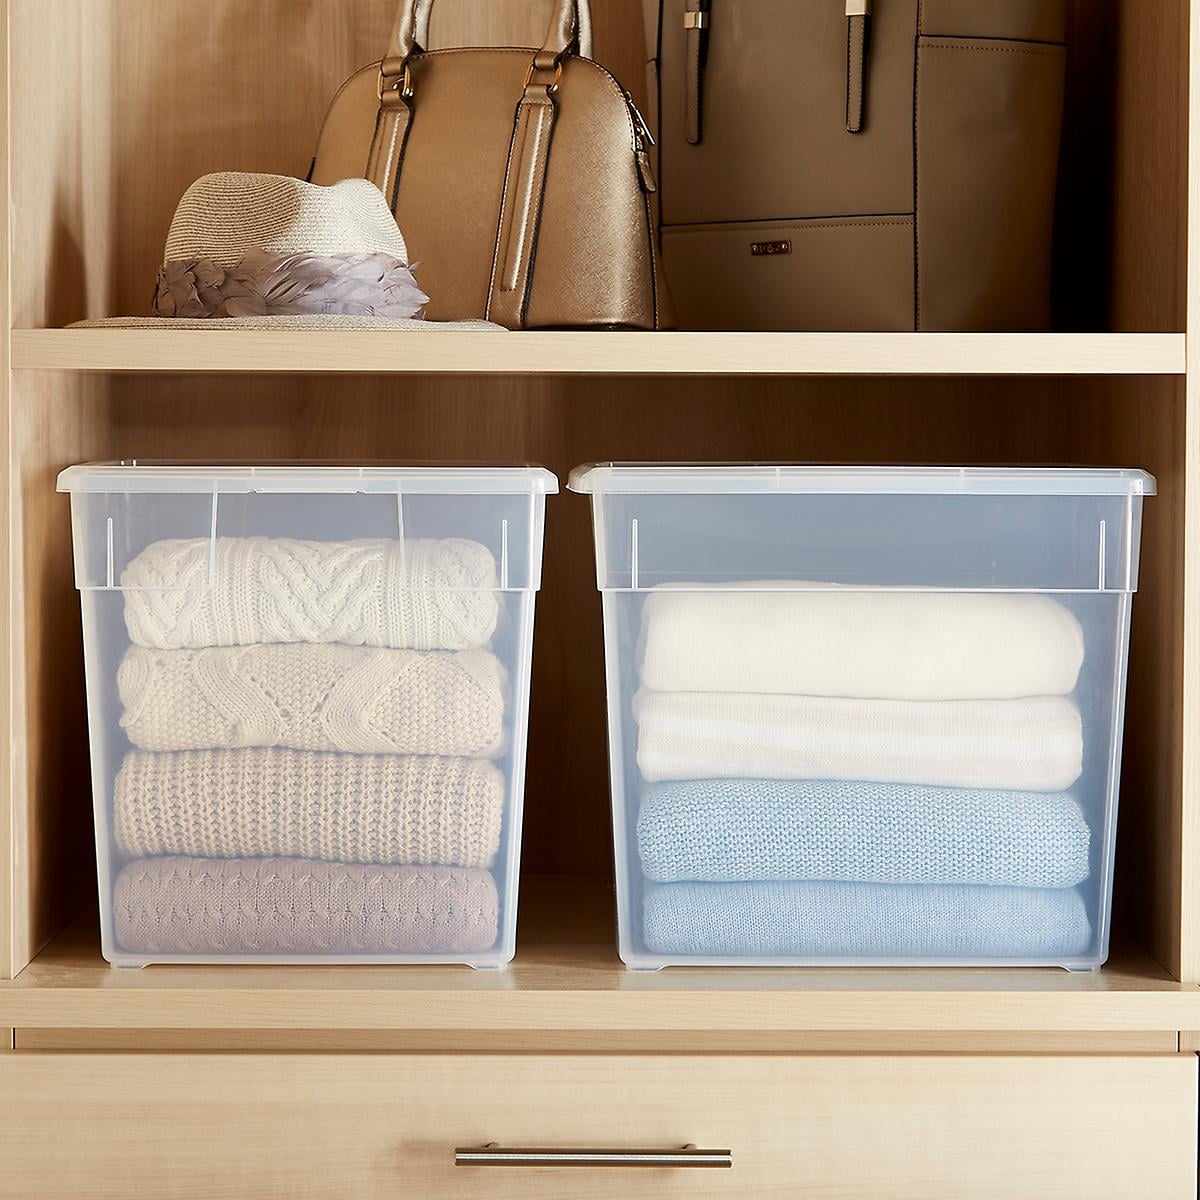 15 CLEVER Home Organization MUST HAVES (, Container Store